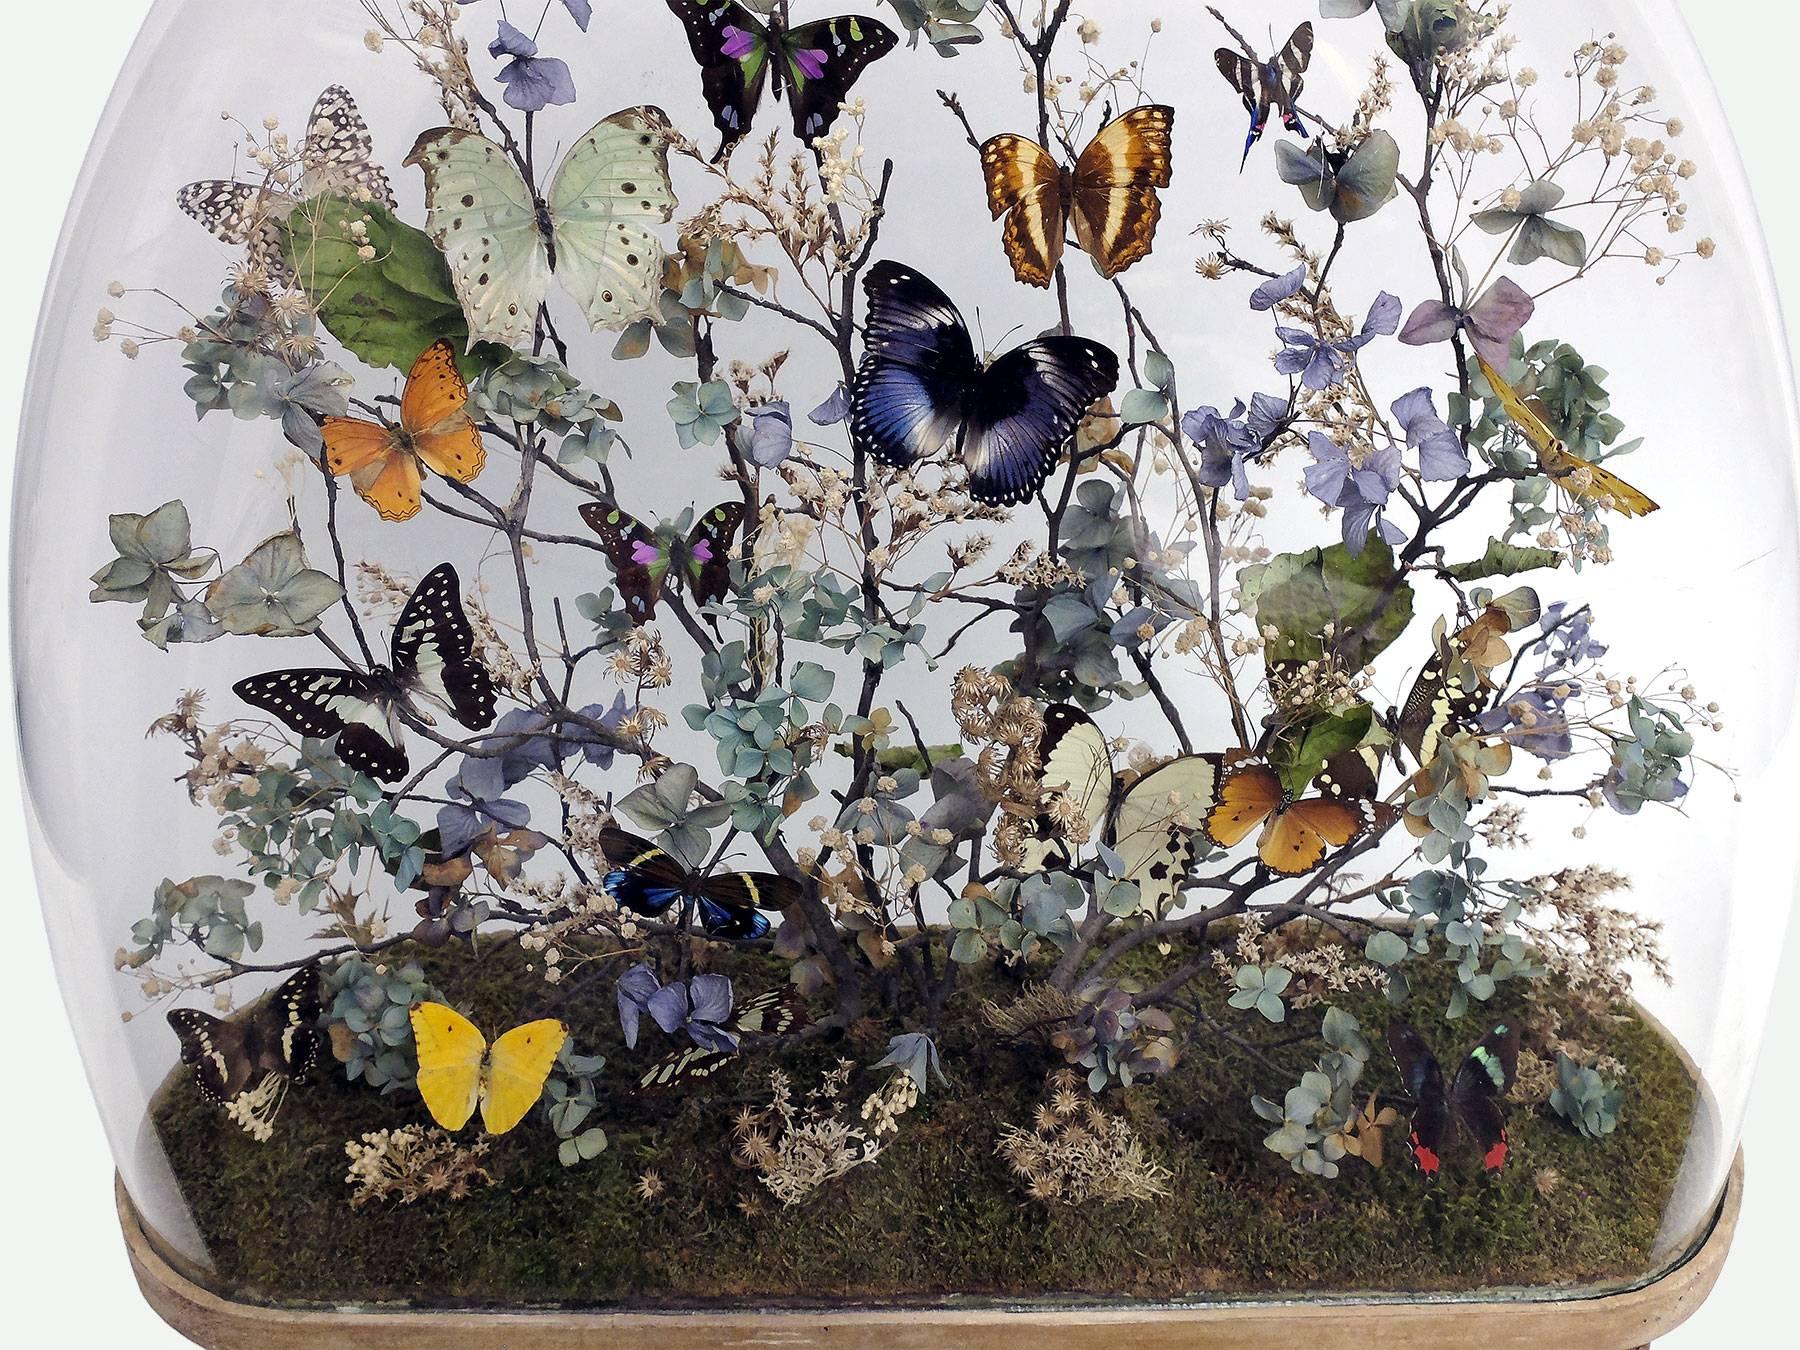 Splendid and Unique Wunderkammer Diorama with Butterflies and Flowers 2